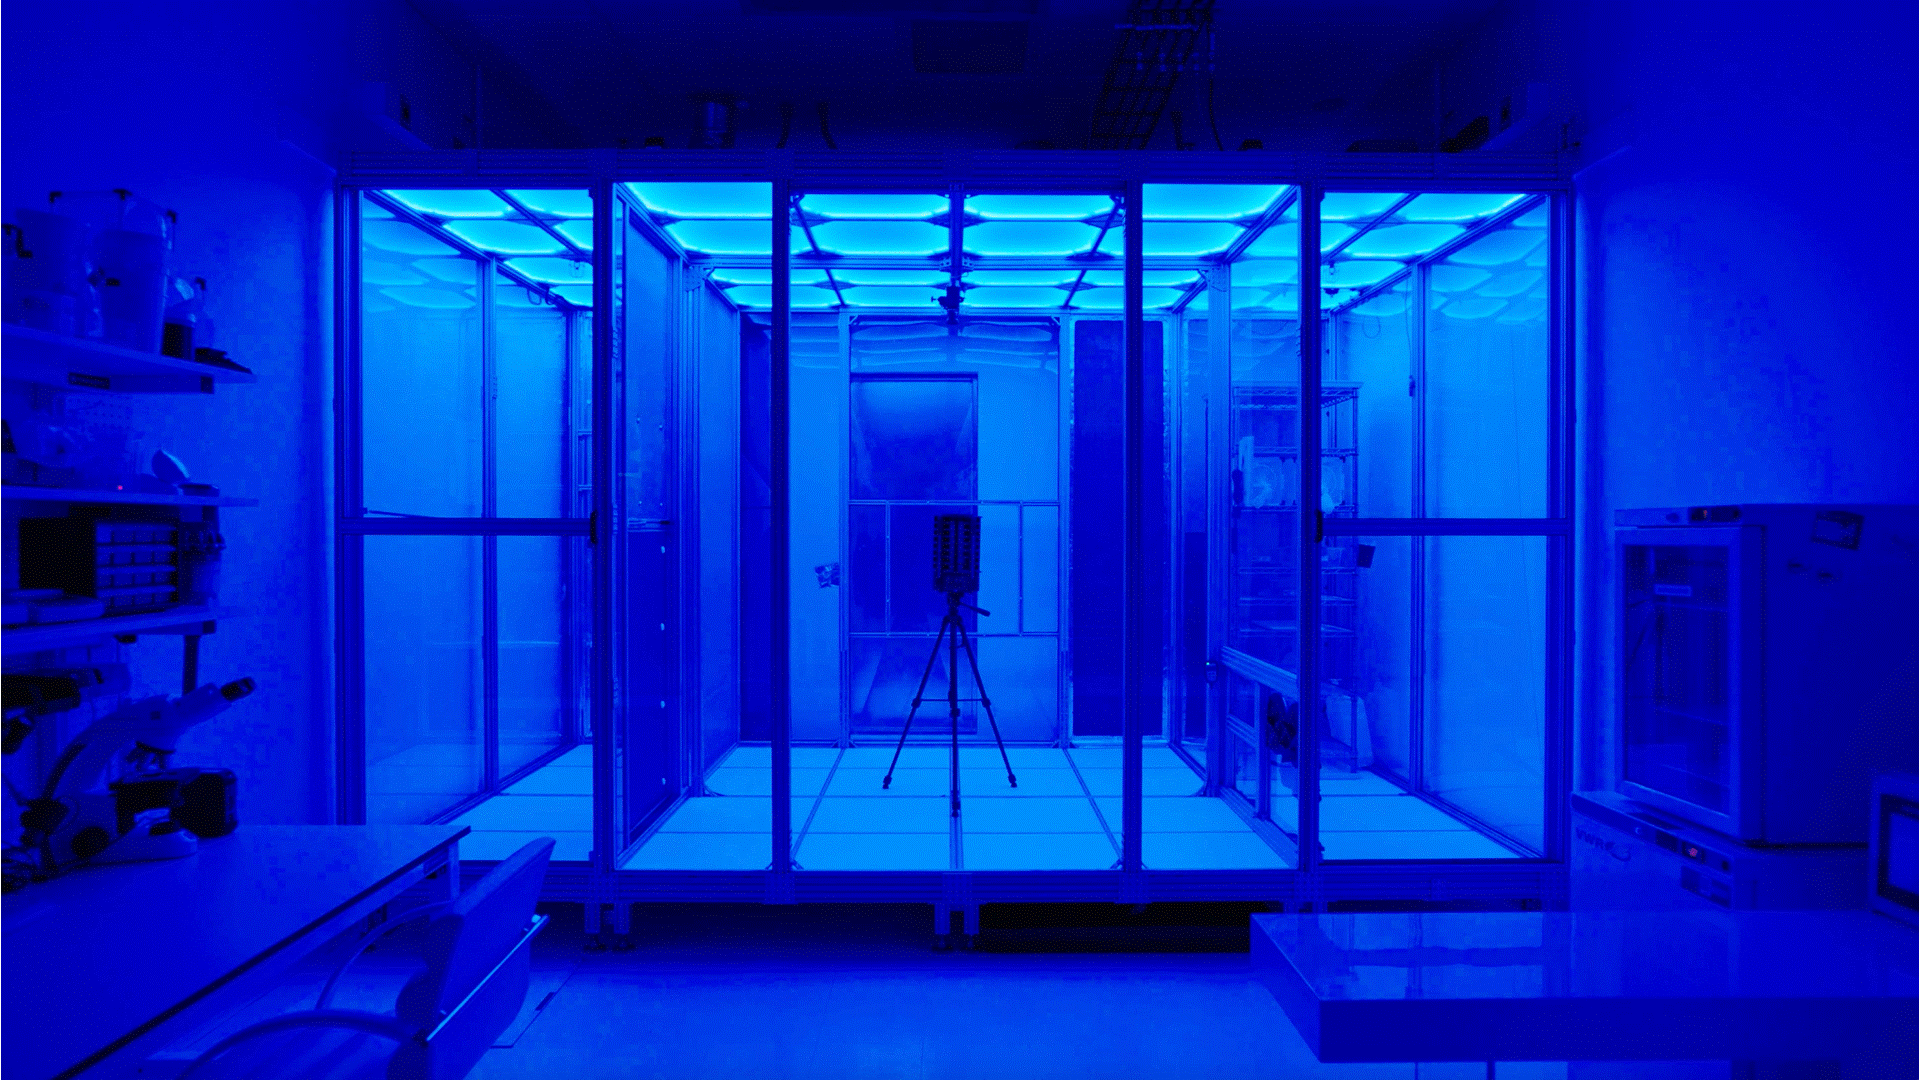 Laboratory with changing light colors